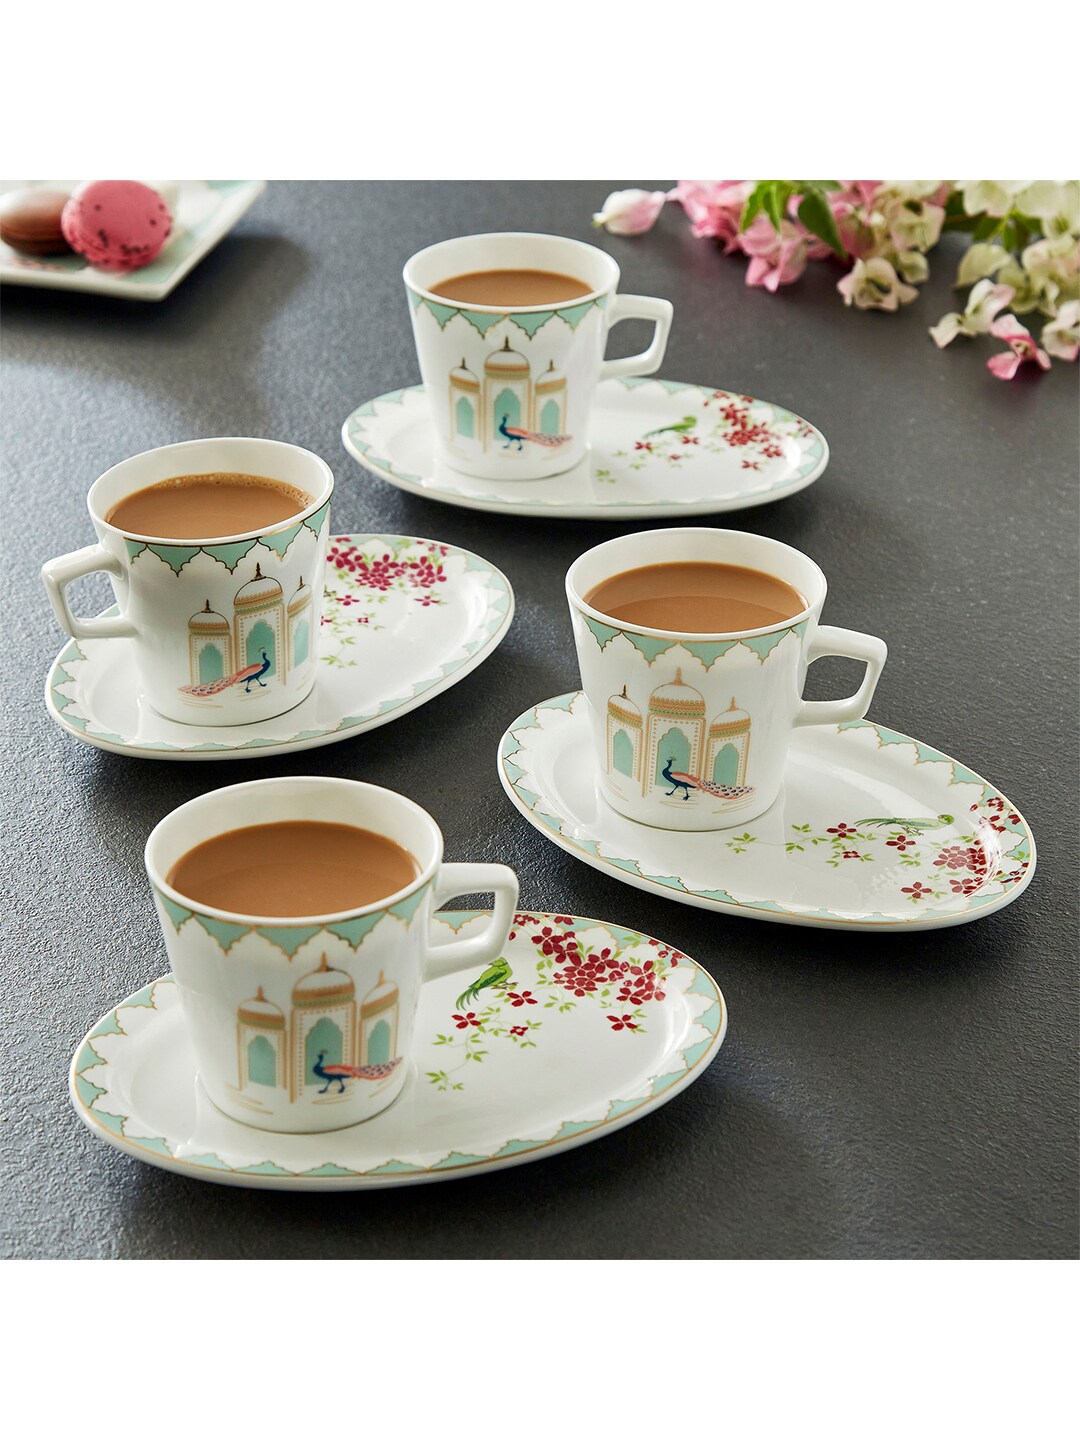 Home Centre White & Red Printed Bone China Glossy Cups and Saucers Set of Cups and Mugs Price in India